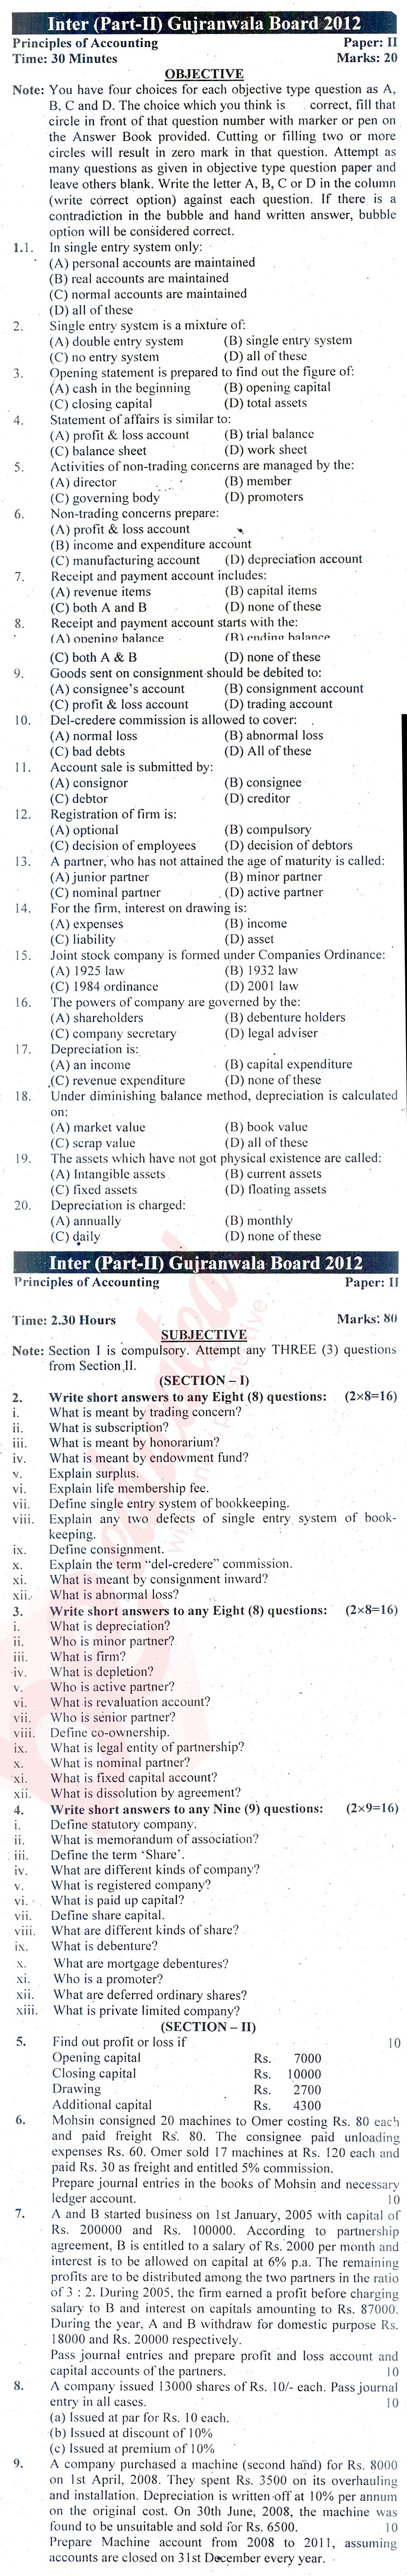 Principles of Accounting ICOM Part 2 Past Paper Group 1 BISE Gujranwala 2012